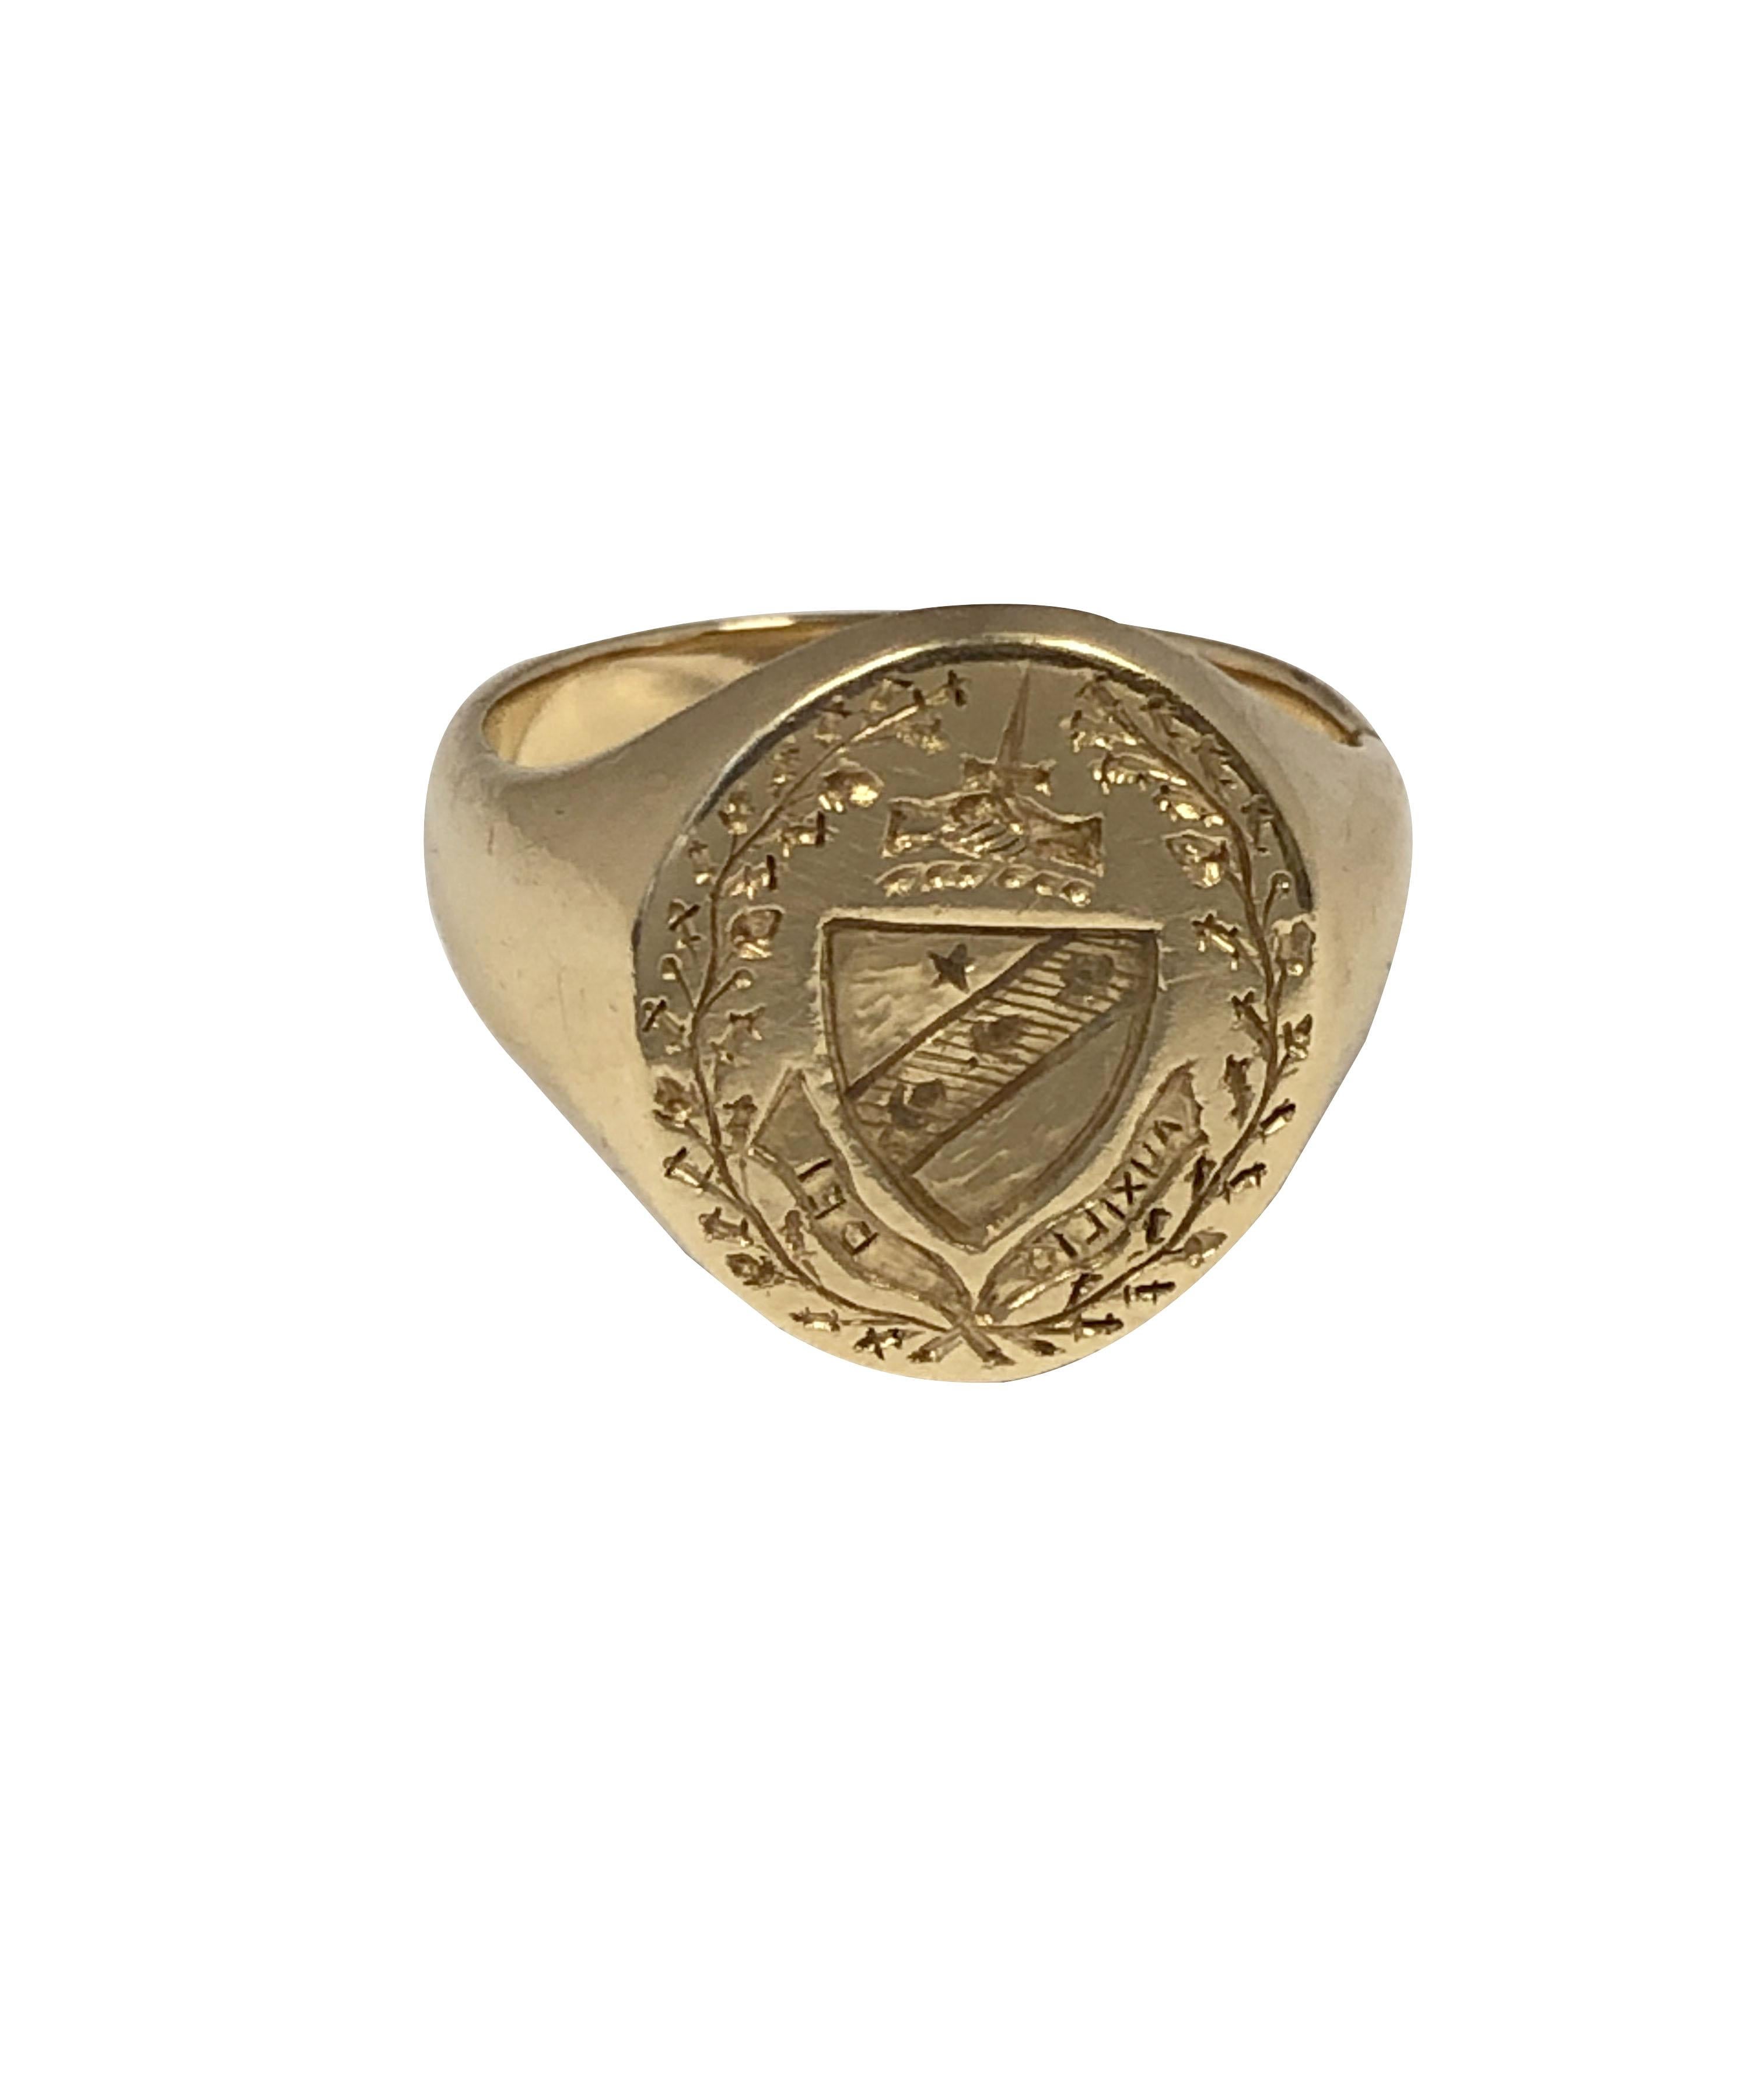 Circa 1910 - 1940 14k Yellow Gold Signet Crest Ring, the top of the ring measures 5/8 x 9/16 inch and has a detailed deep carved Intaglio Crest. Finger size 7 and  weighs 9.8 Grams.